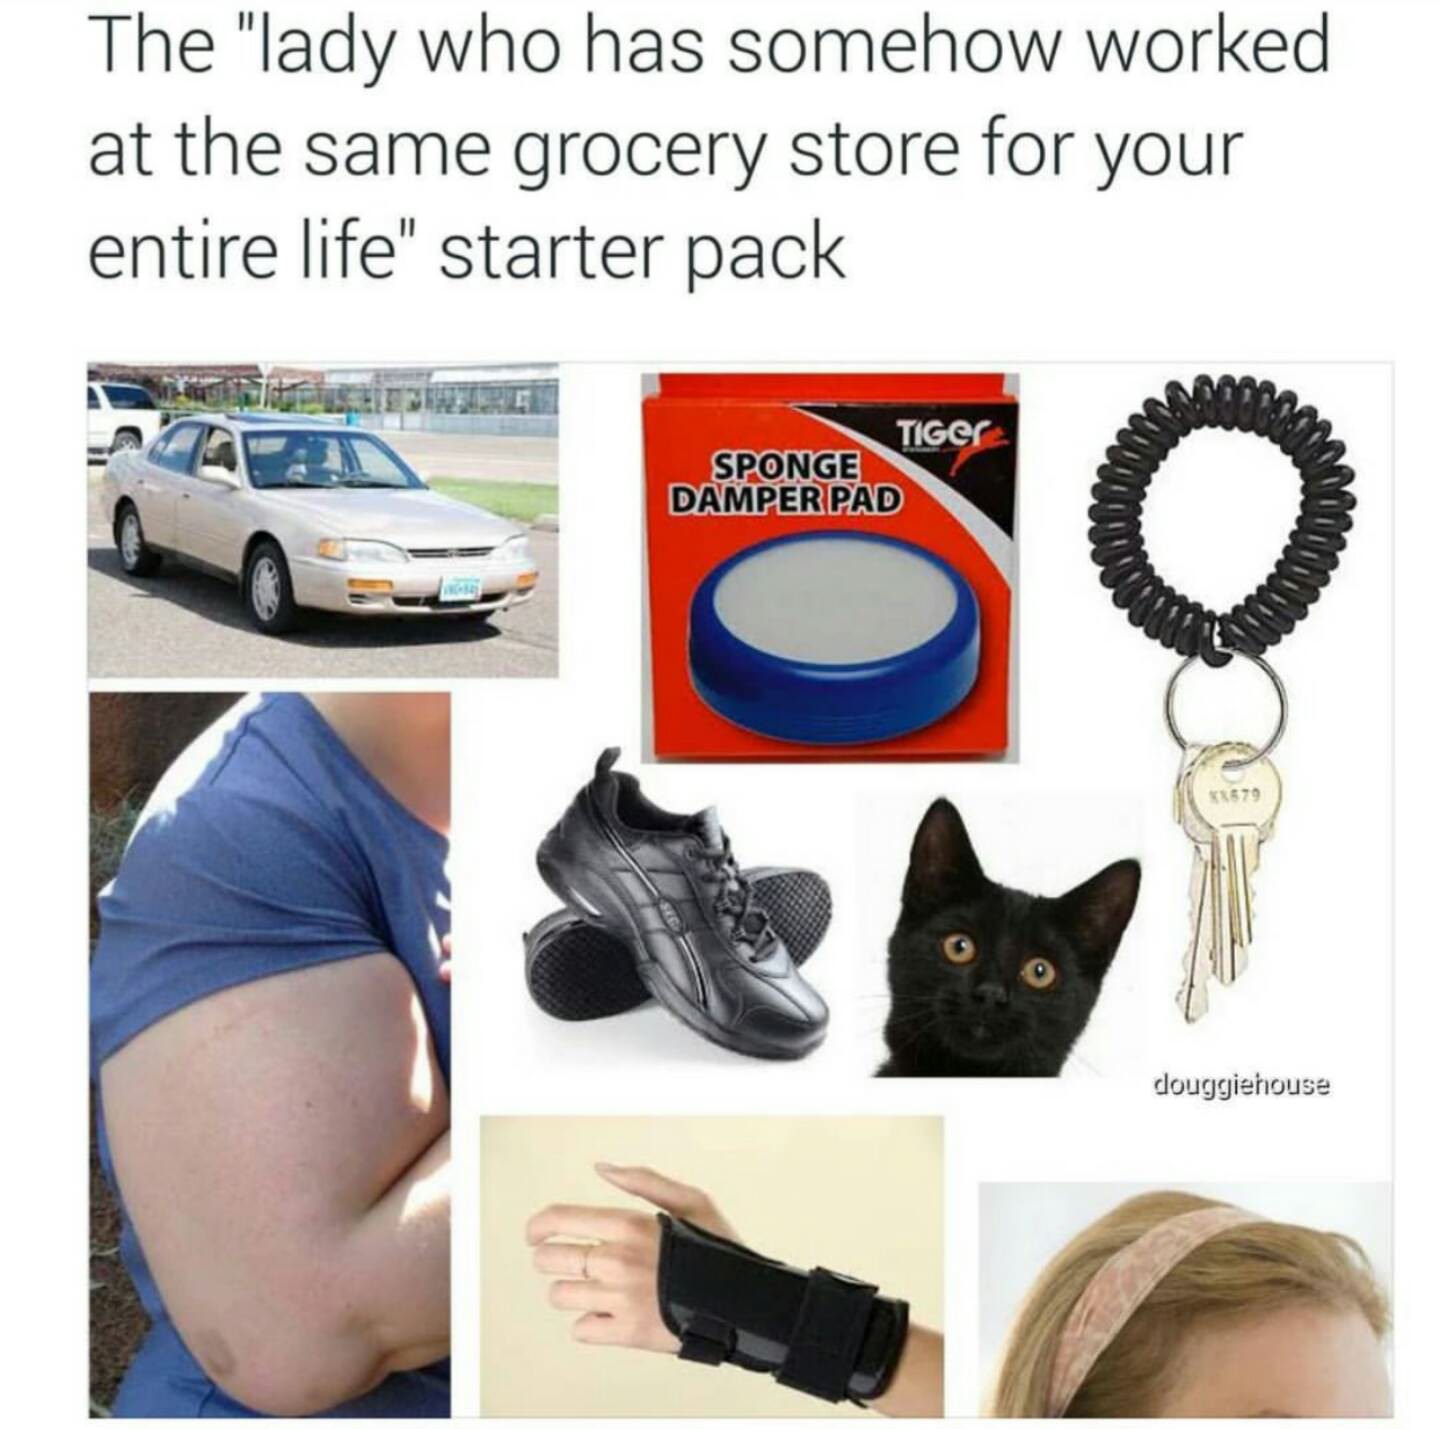 starter pack - funny starter pack memes - The "lady who has somehow worked at the same grocery store for your entire life" starter pack TIGer Sponge Damper Pad douggiehouse